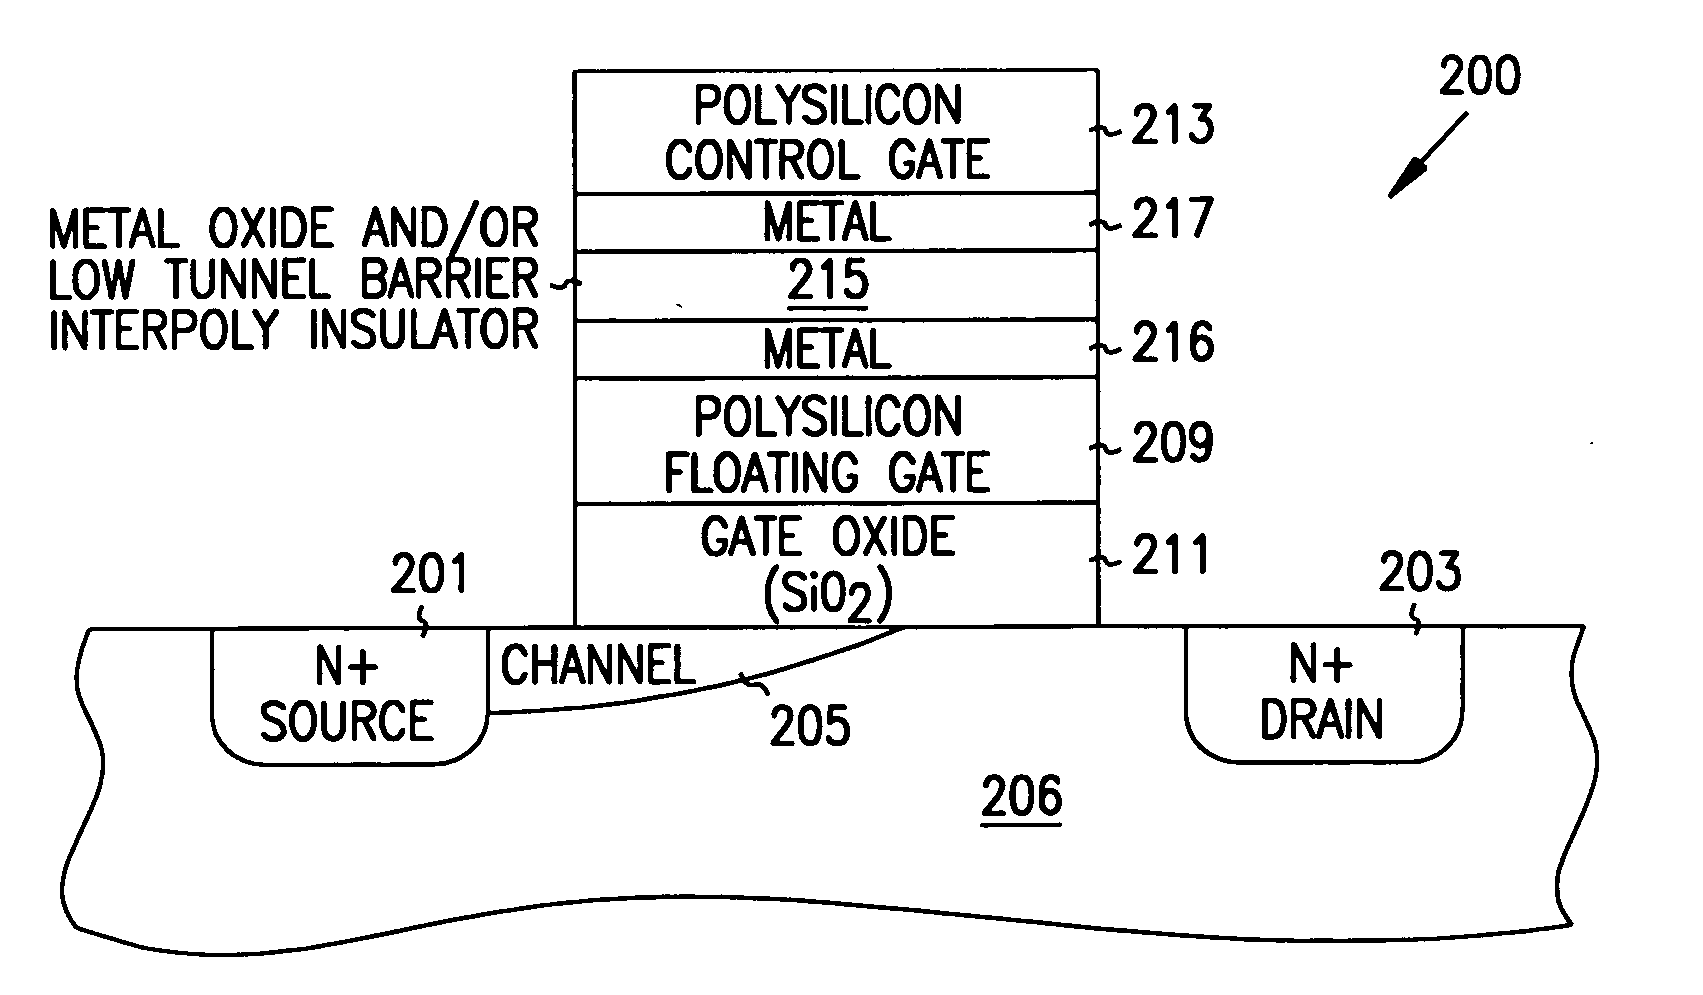 Service programmable logic arrays with low tunnel barrier interpoly insulators